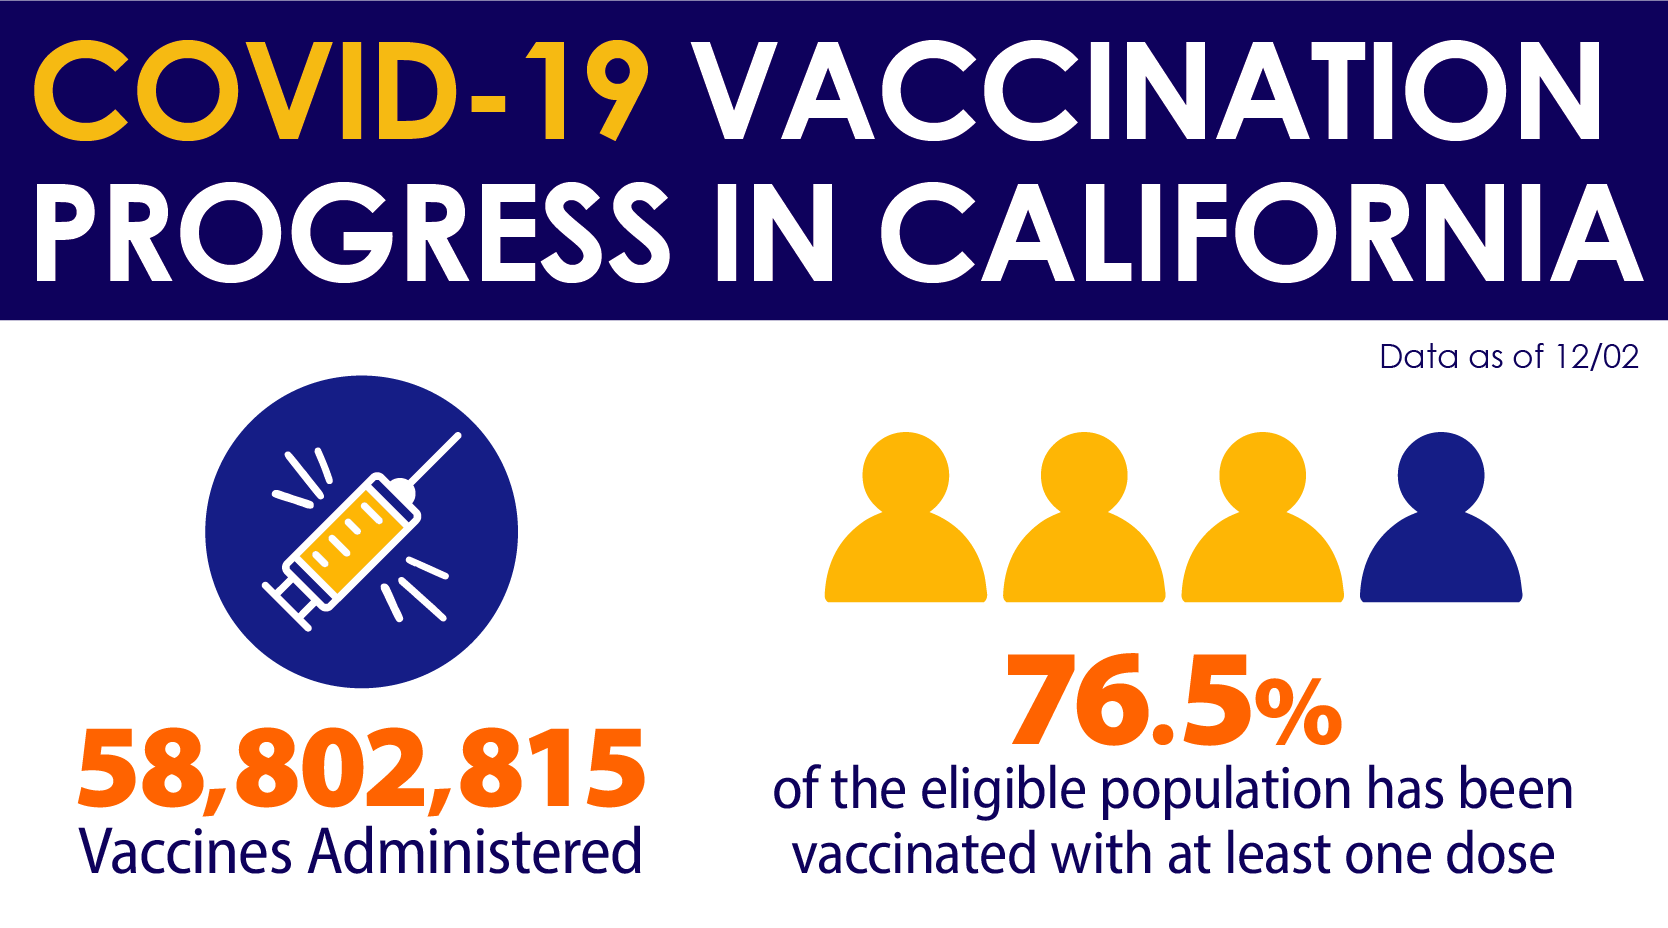 covid-19 vaccination progress in california. as of december 2, 2021 there have been 58.8 million doses administered and 76.5% of population has been vaccinated with at least one dose